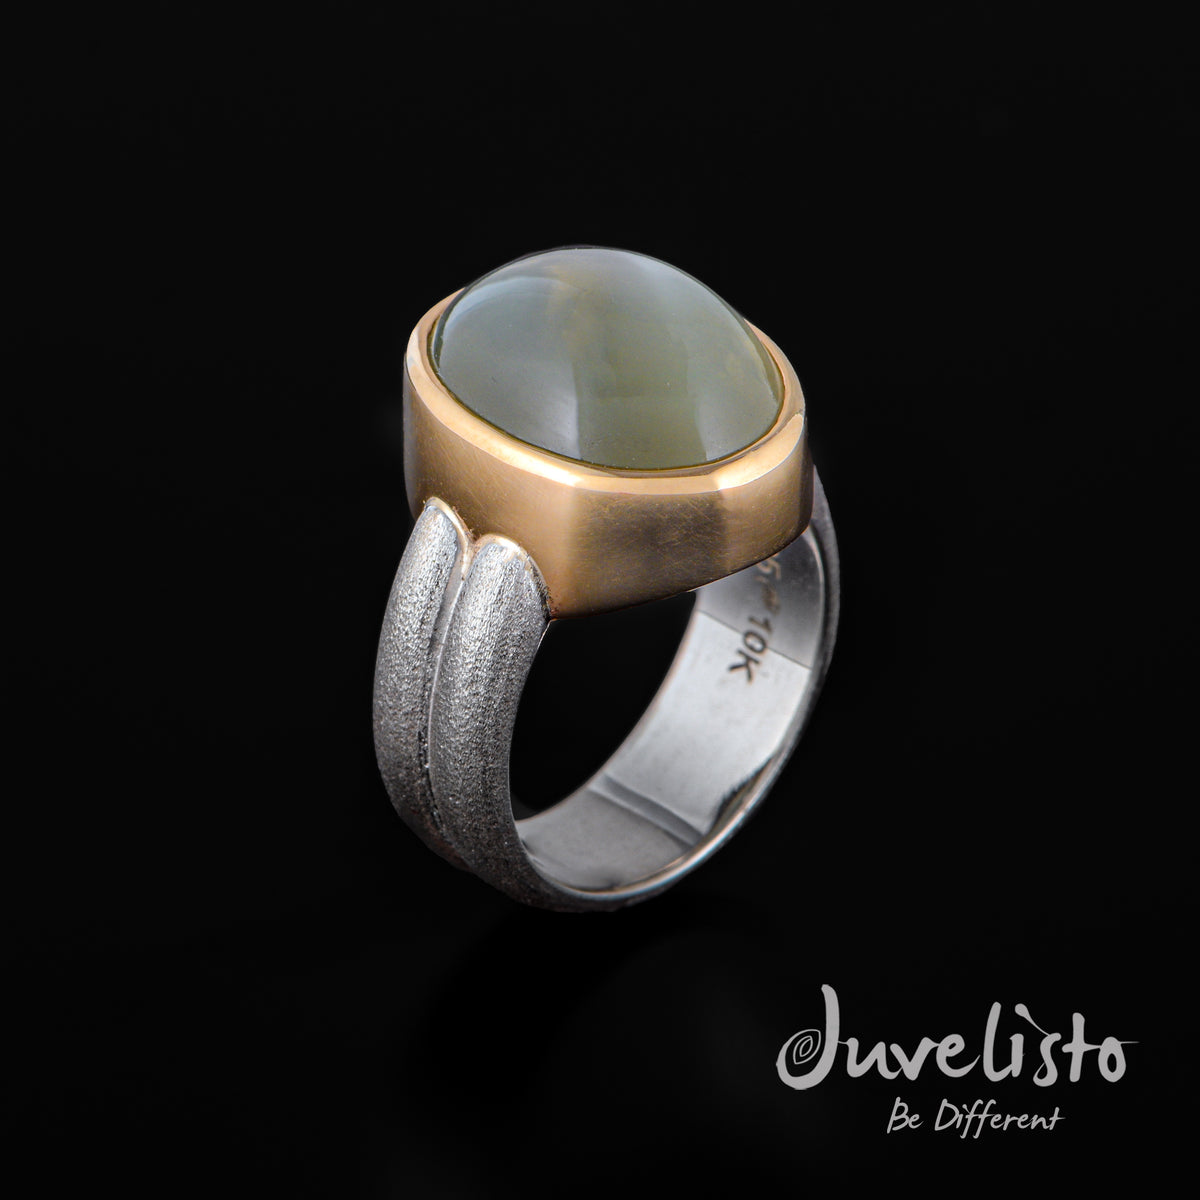 Juvelisto Design  Sterling Silver and 10k Gold Ring with Moonstone